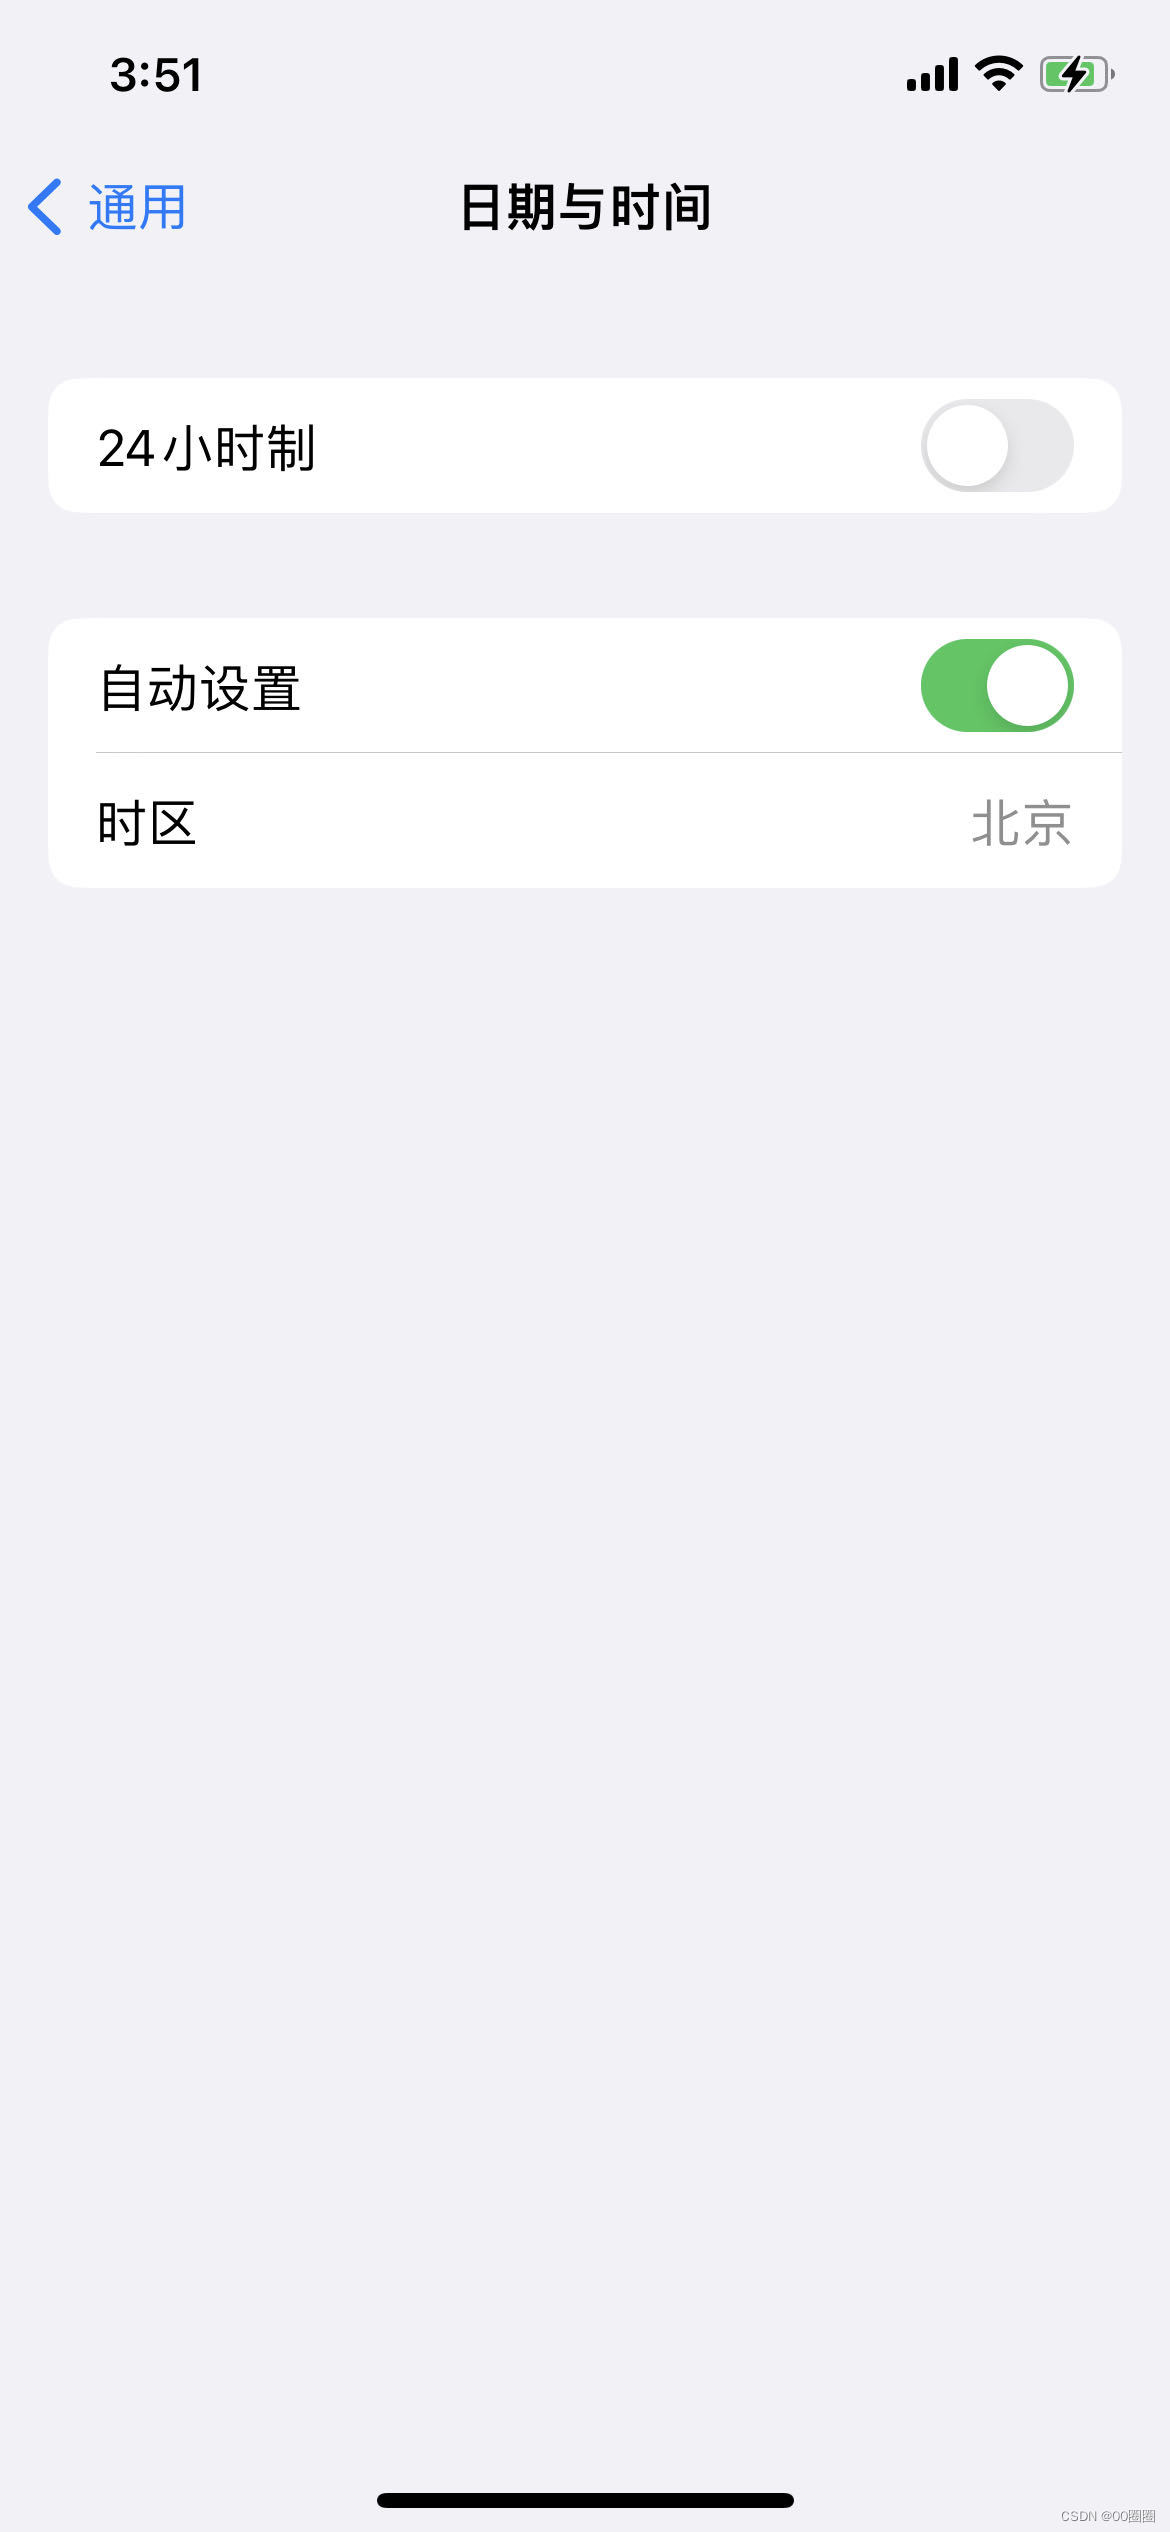 iOS<span style='color:red;'>16</span>.5 <span style='color:red;'>以上</span><span style='color:red;'>12</span><span style='color:red;'>小时</span><span style='color:red;'>制</span>/<span style='color:red;'>24</span><span style='color:red;'>小时</span><span style='color:red;'>制</span> HH/hh引起的时间计算错误